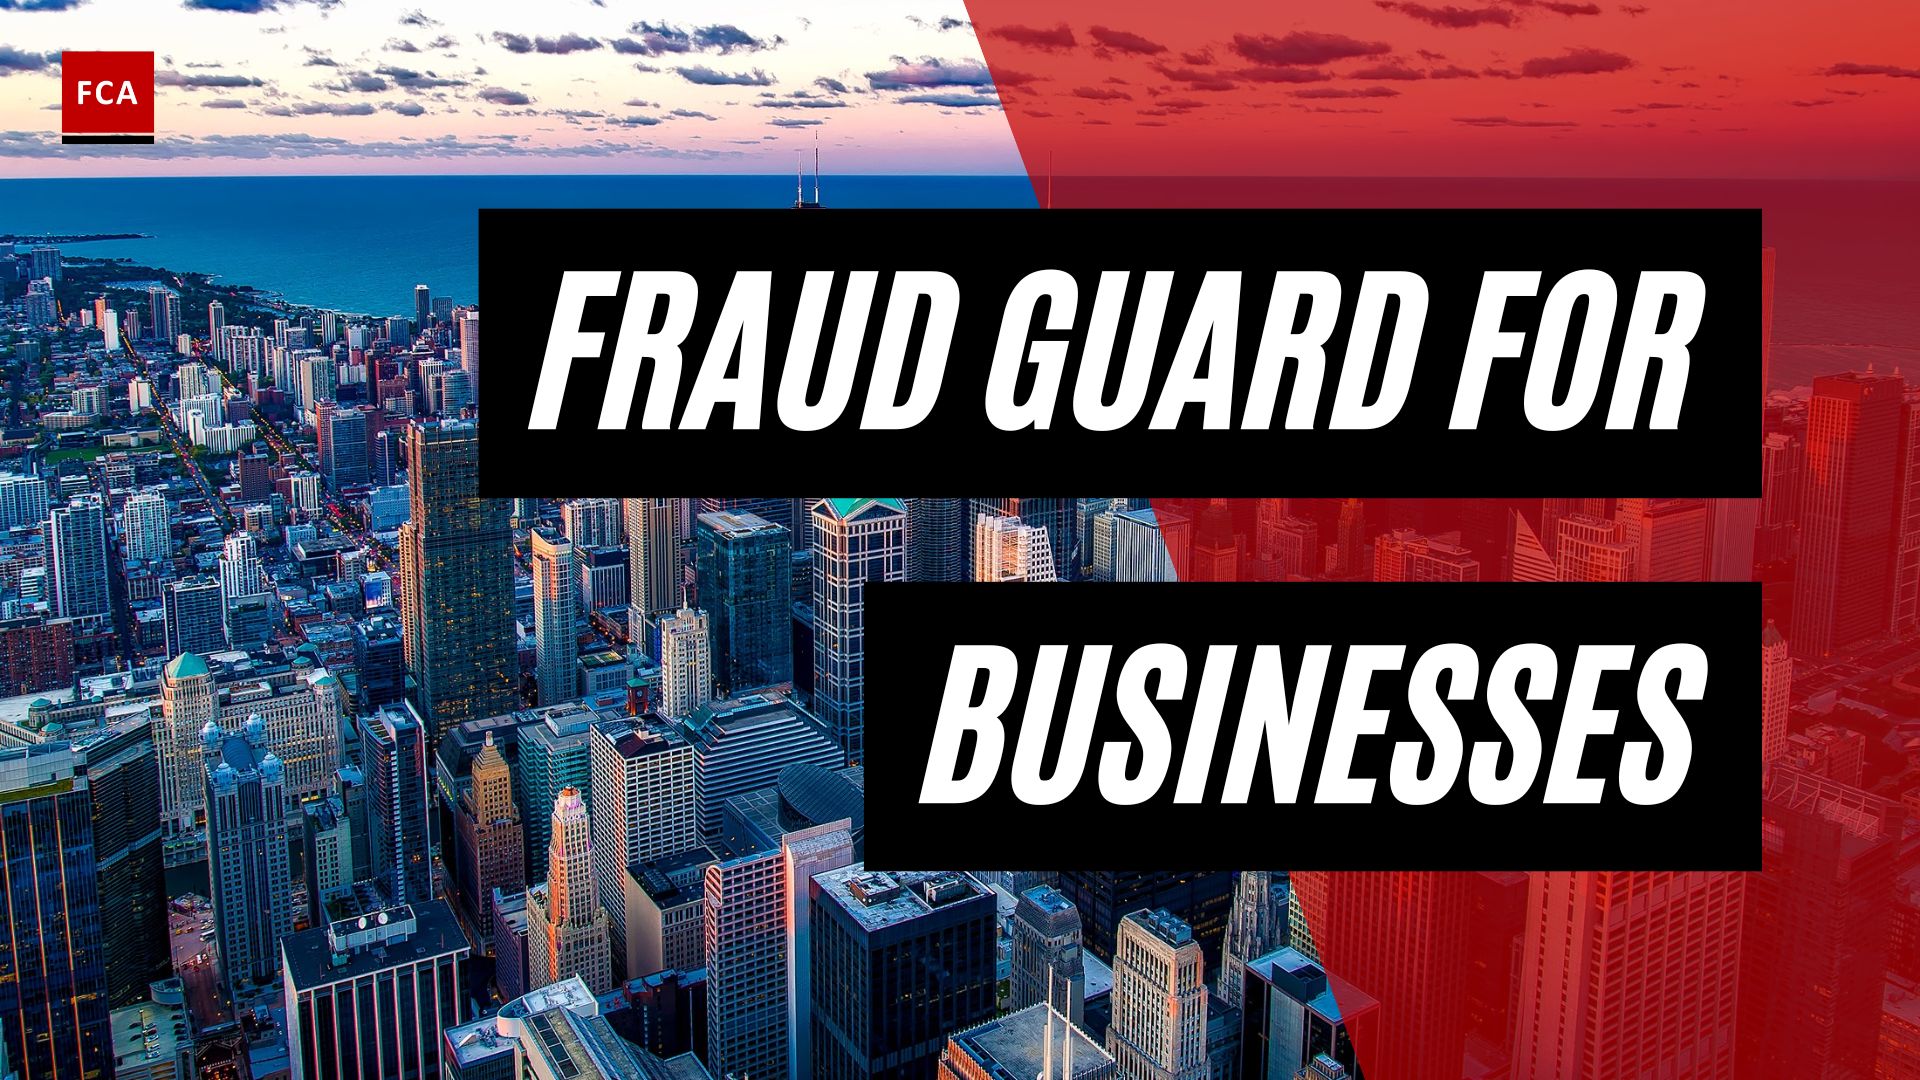 Guarding Against Fraud: Empowering Businesses With Suspicious Activity Reporting